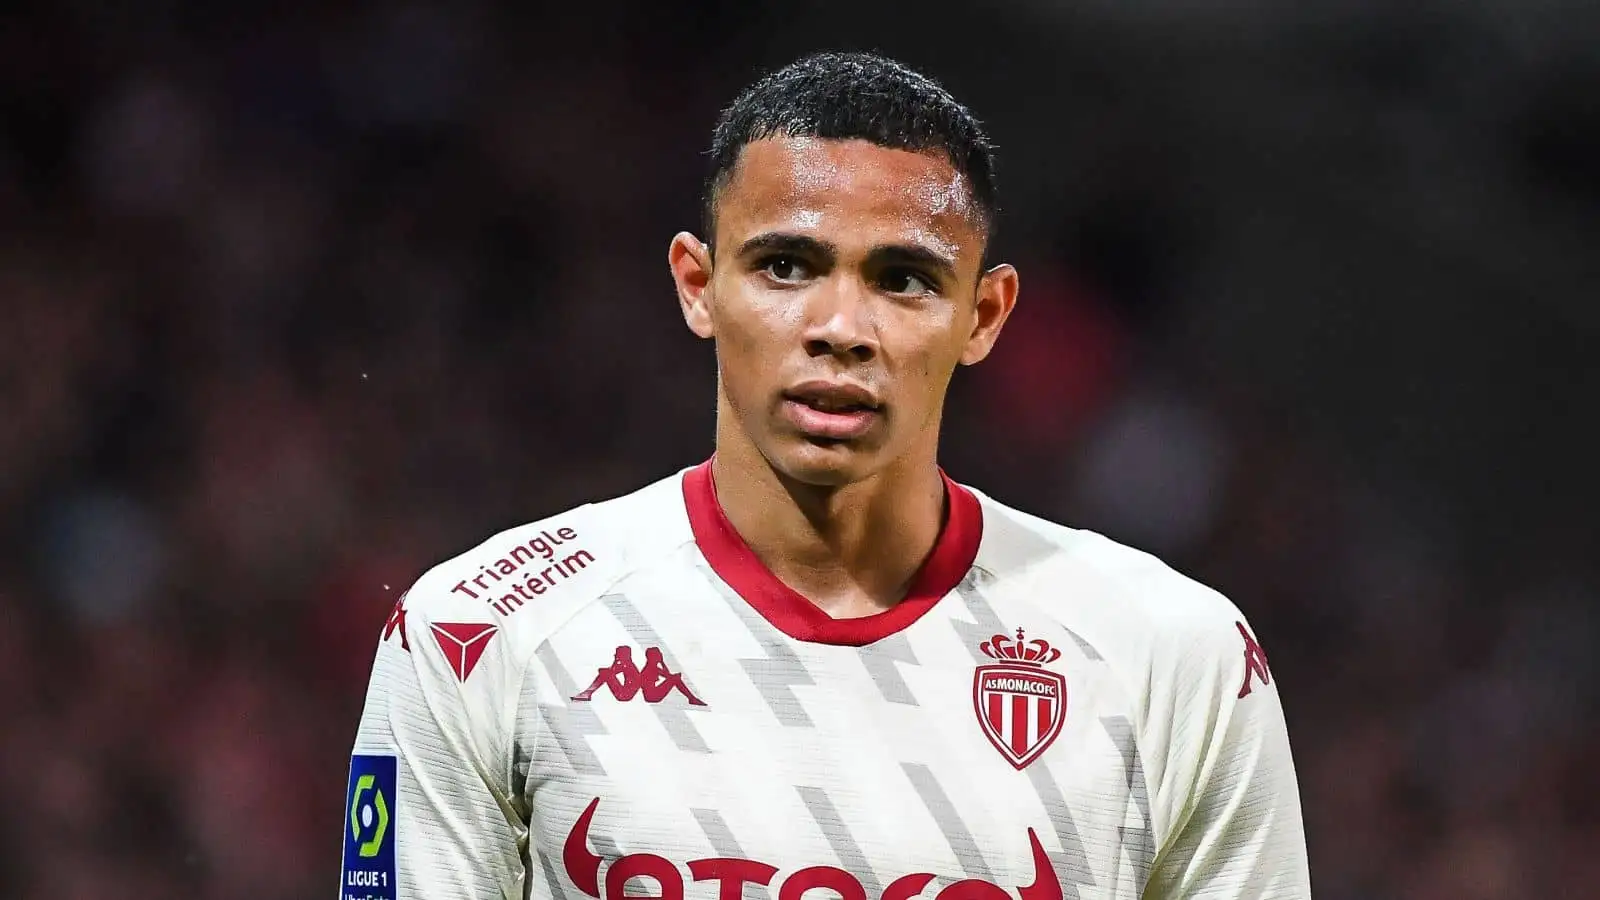 Vanderson DE OLIVEIRA CAMPOS of Monaco during the French championship Ligue 1 football match between LOSC Lille and AS Monaco